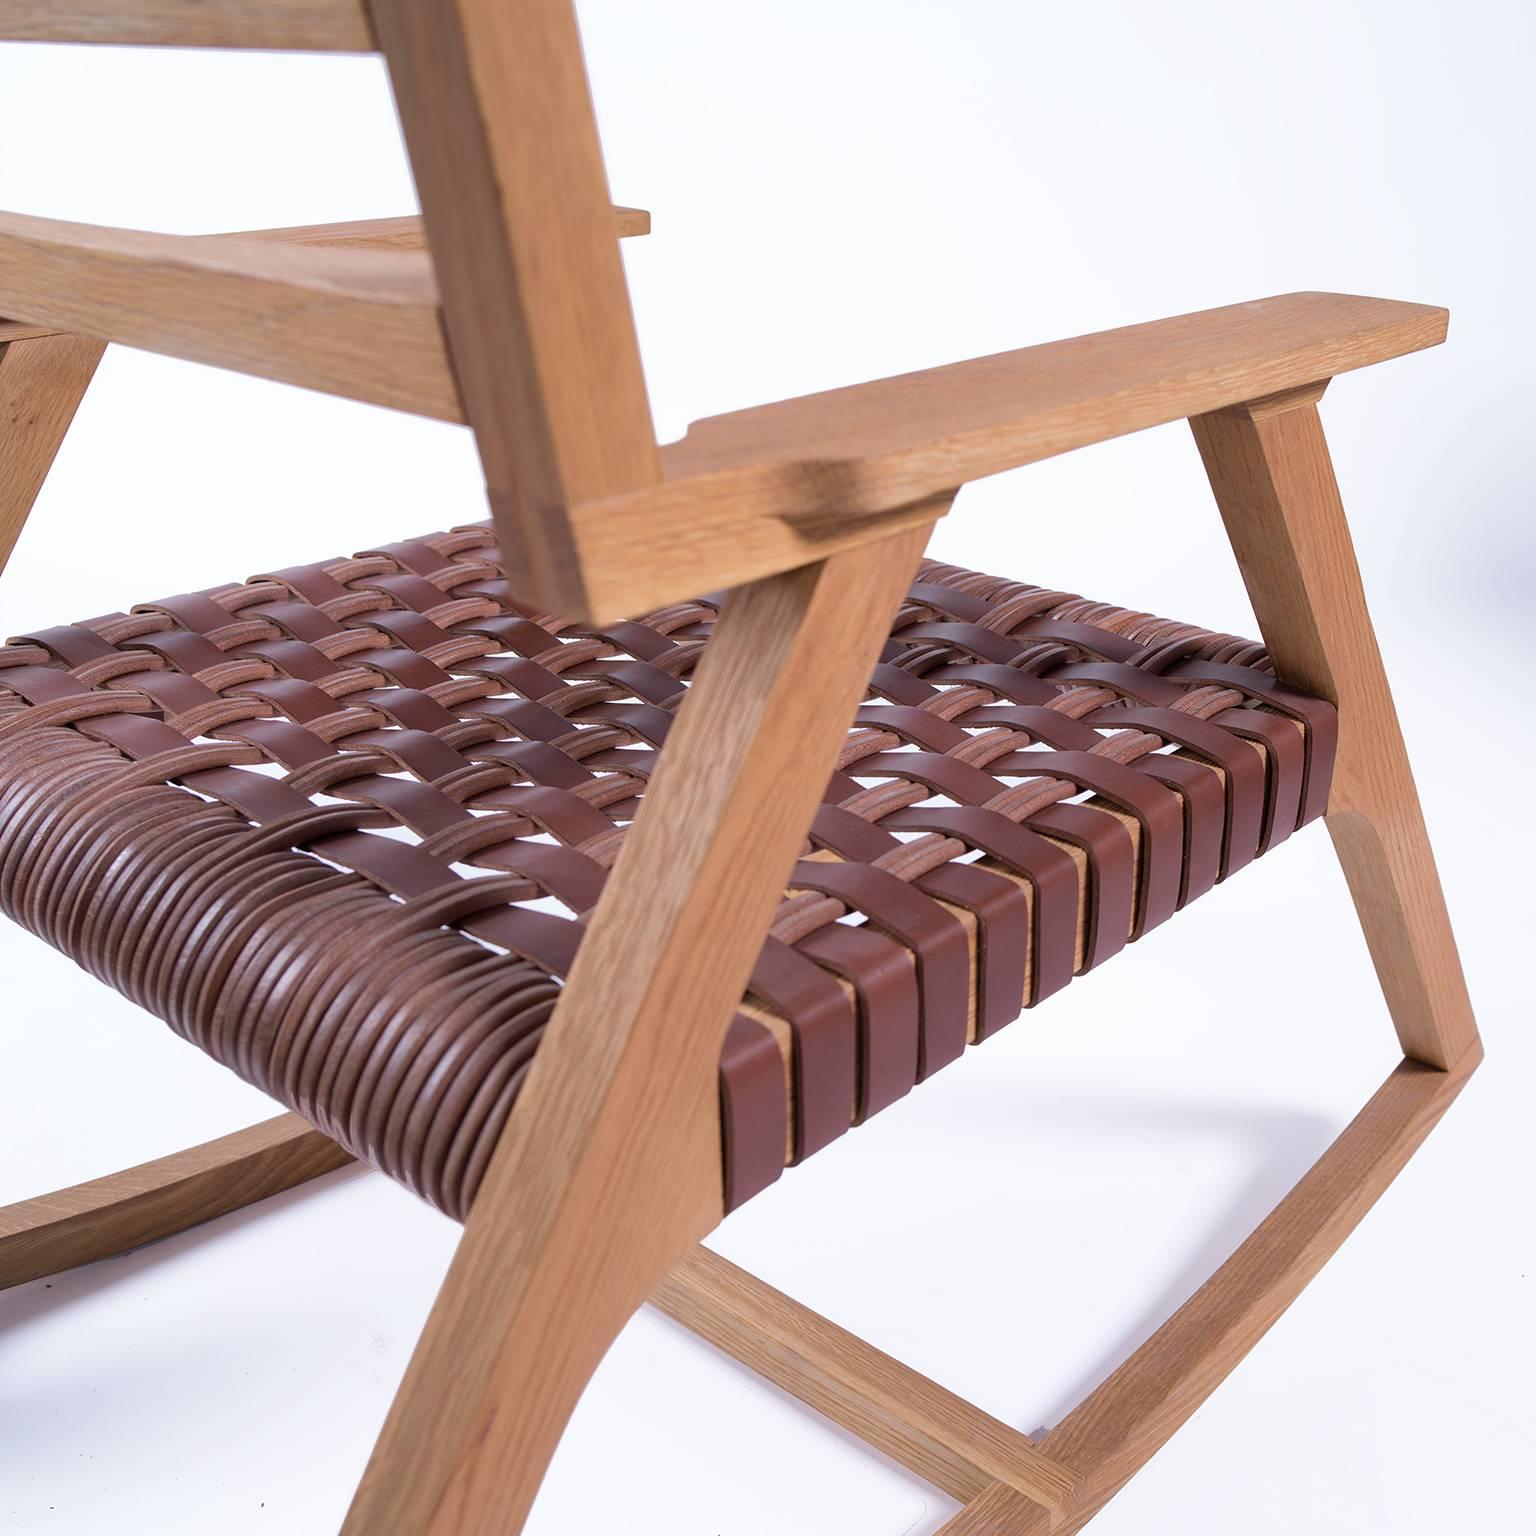 Giacomo Rocking Chair in Oak with Woven Leather Seat (Nordamerikanisch) im Angebot